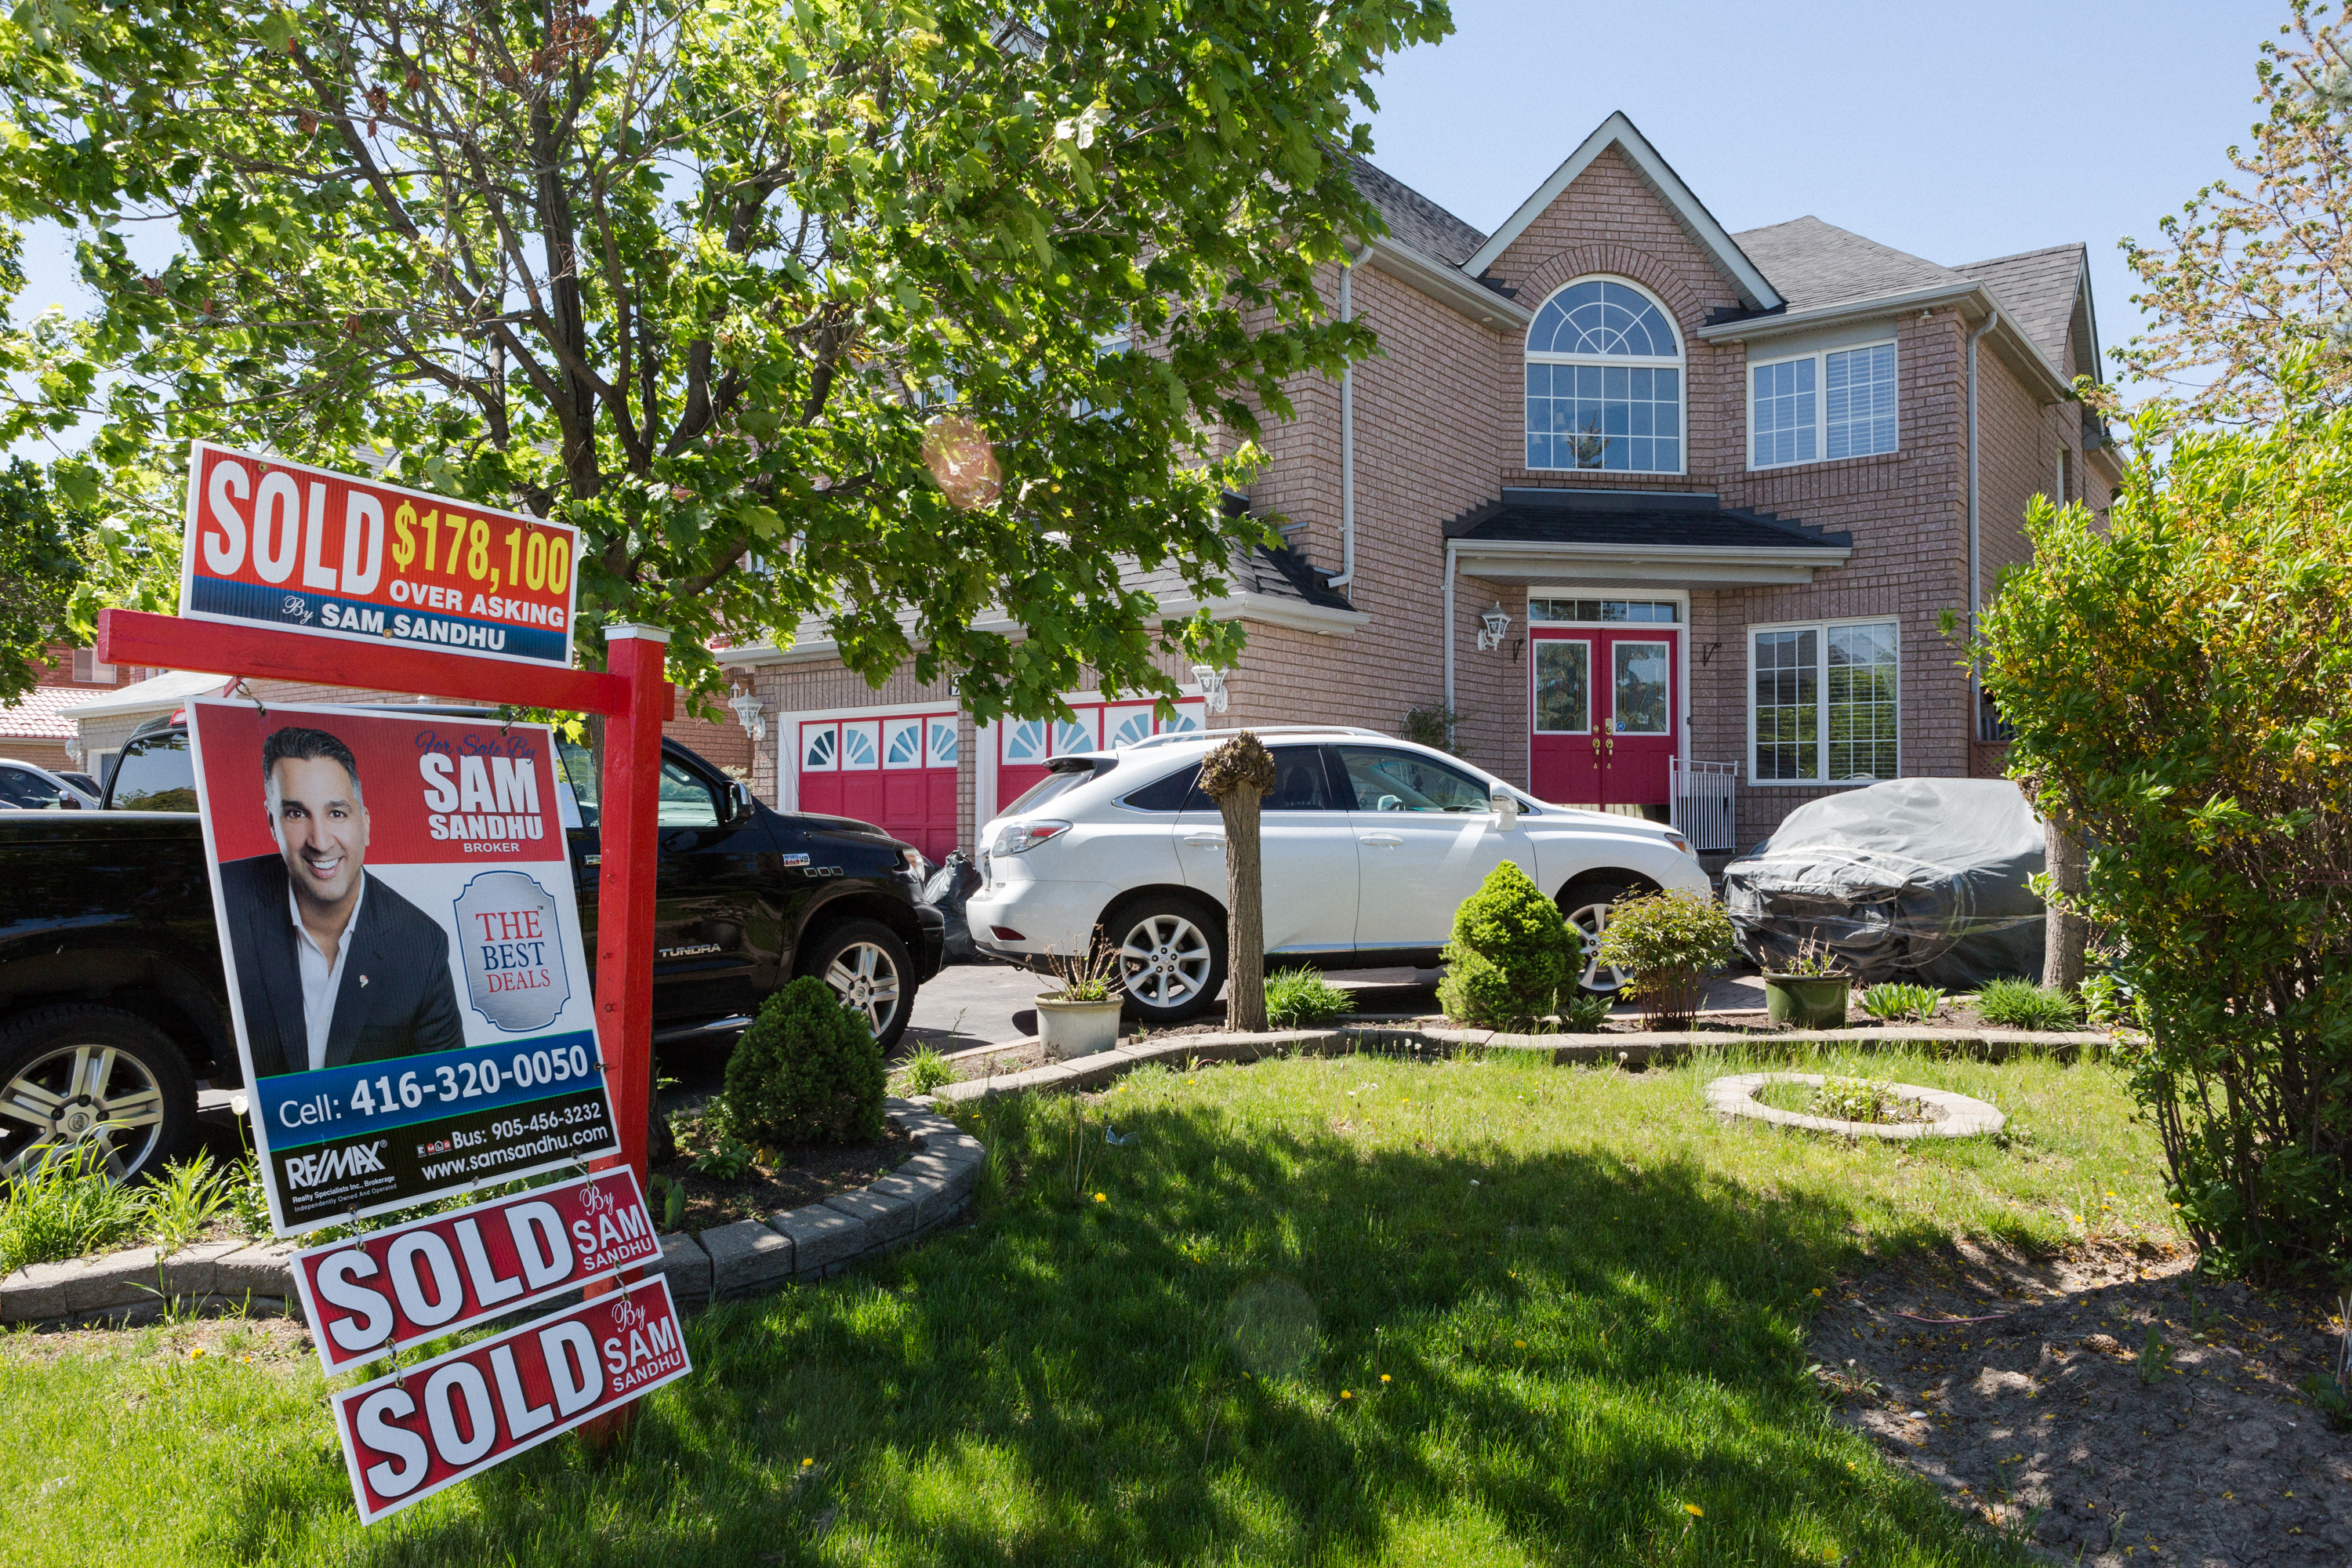 Canadian Real Estate Prices Will Fall 28 By 2020, According To Thi...